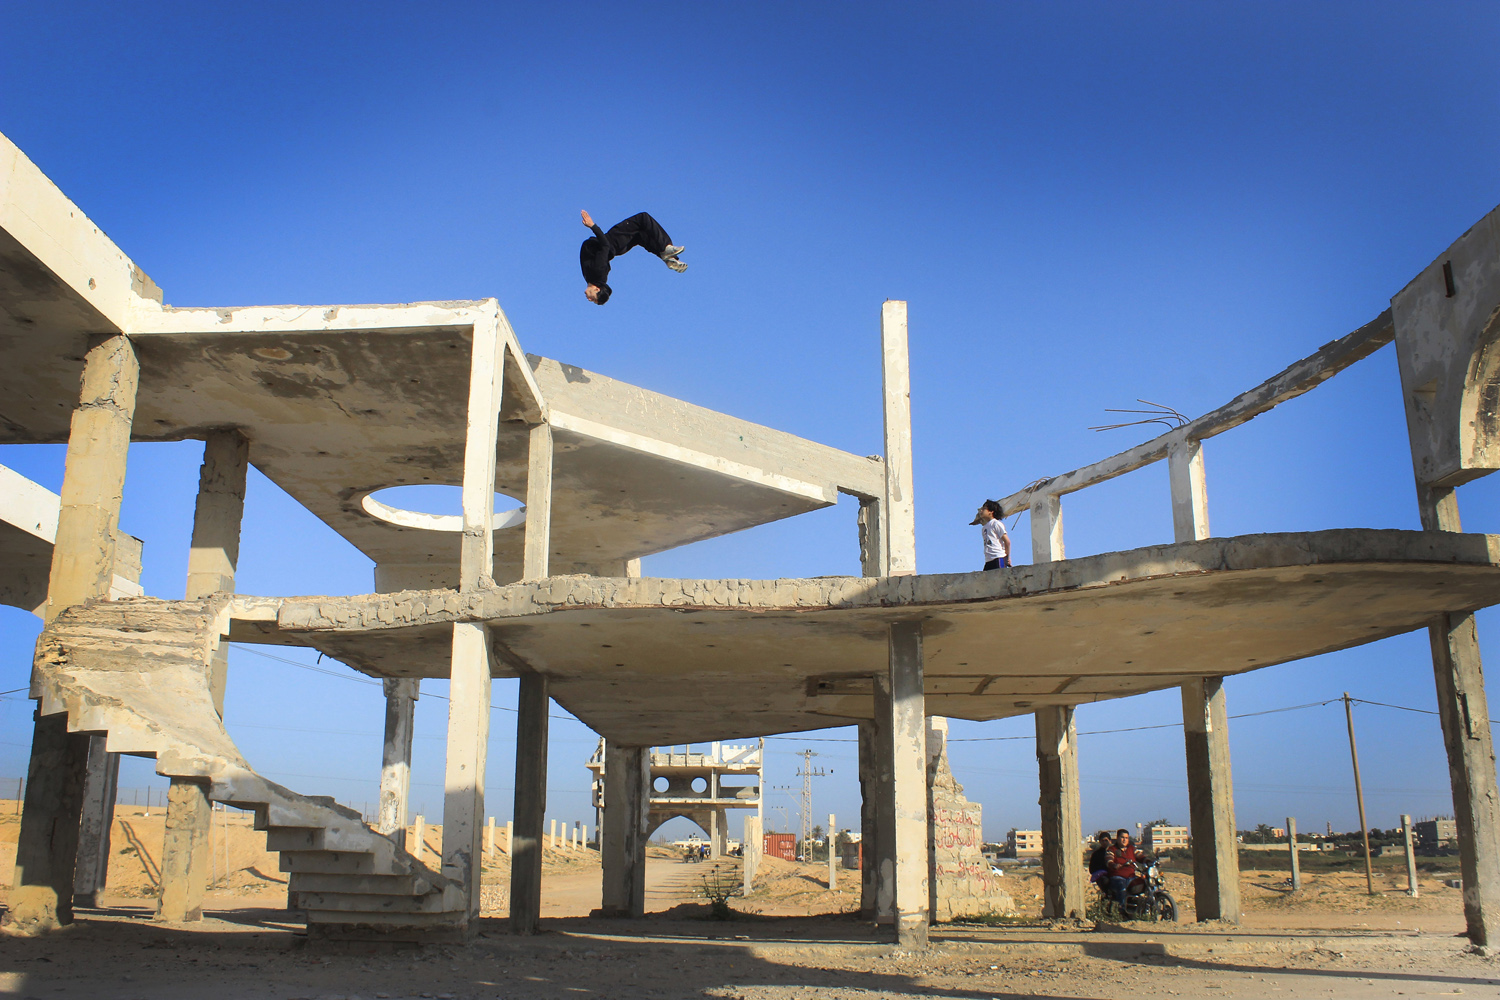 A Parkour team practices in Al-Waha April 4, 2014, near the Al-Sodania area that has been bombed in the last war in Gaza.